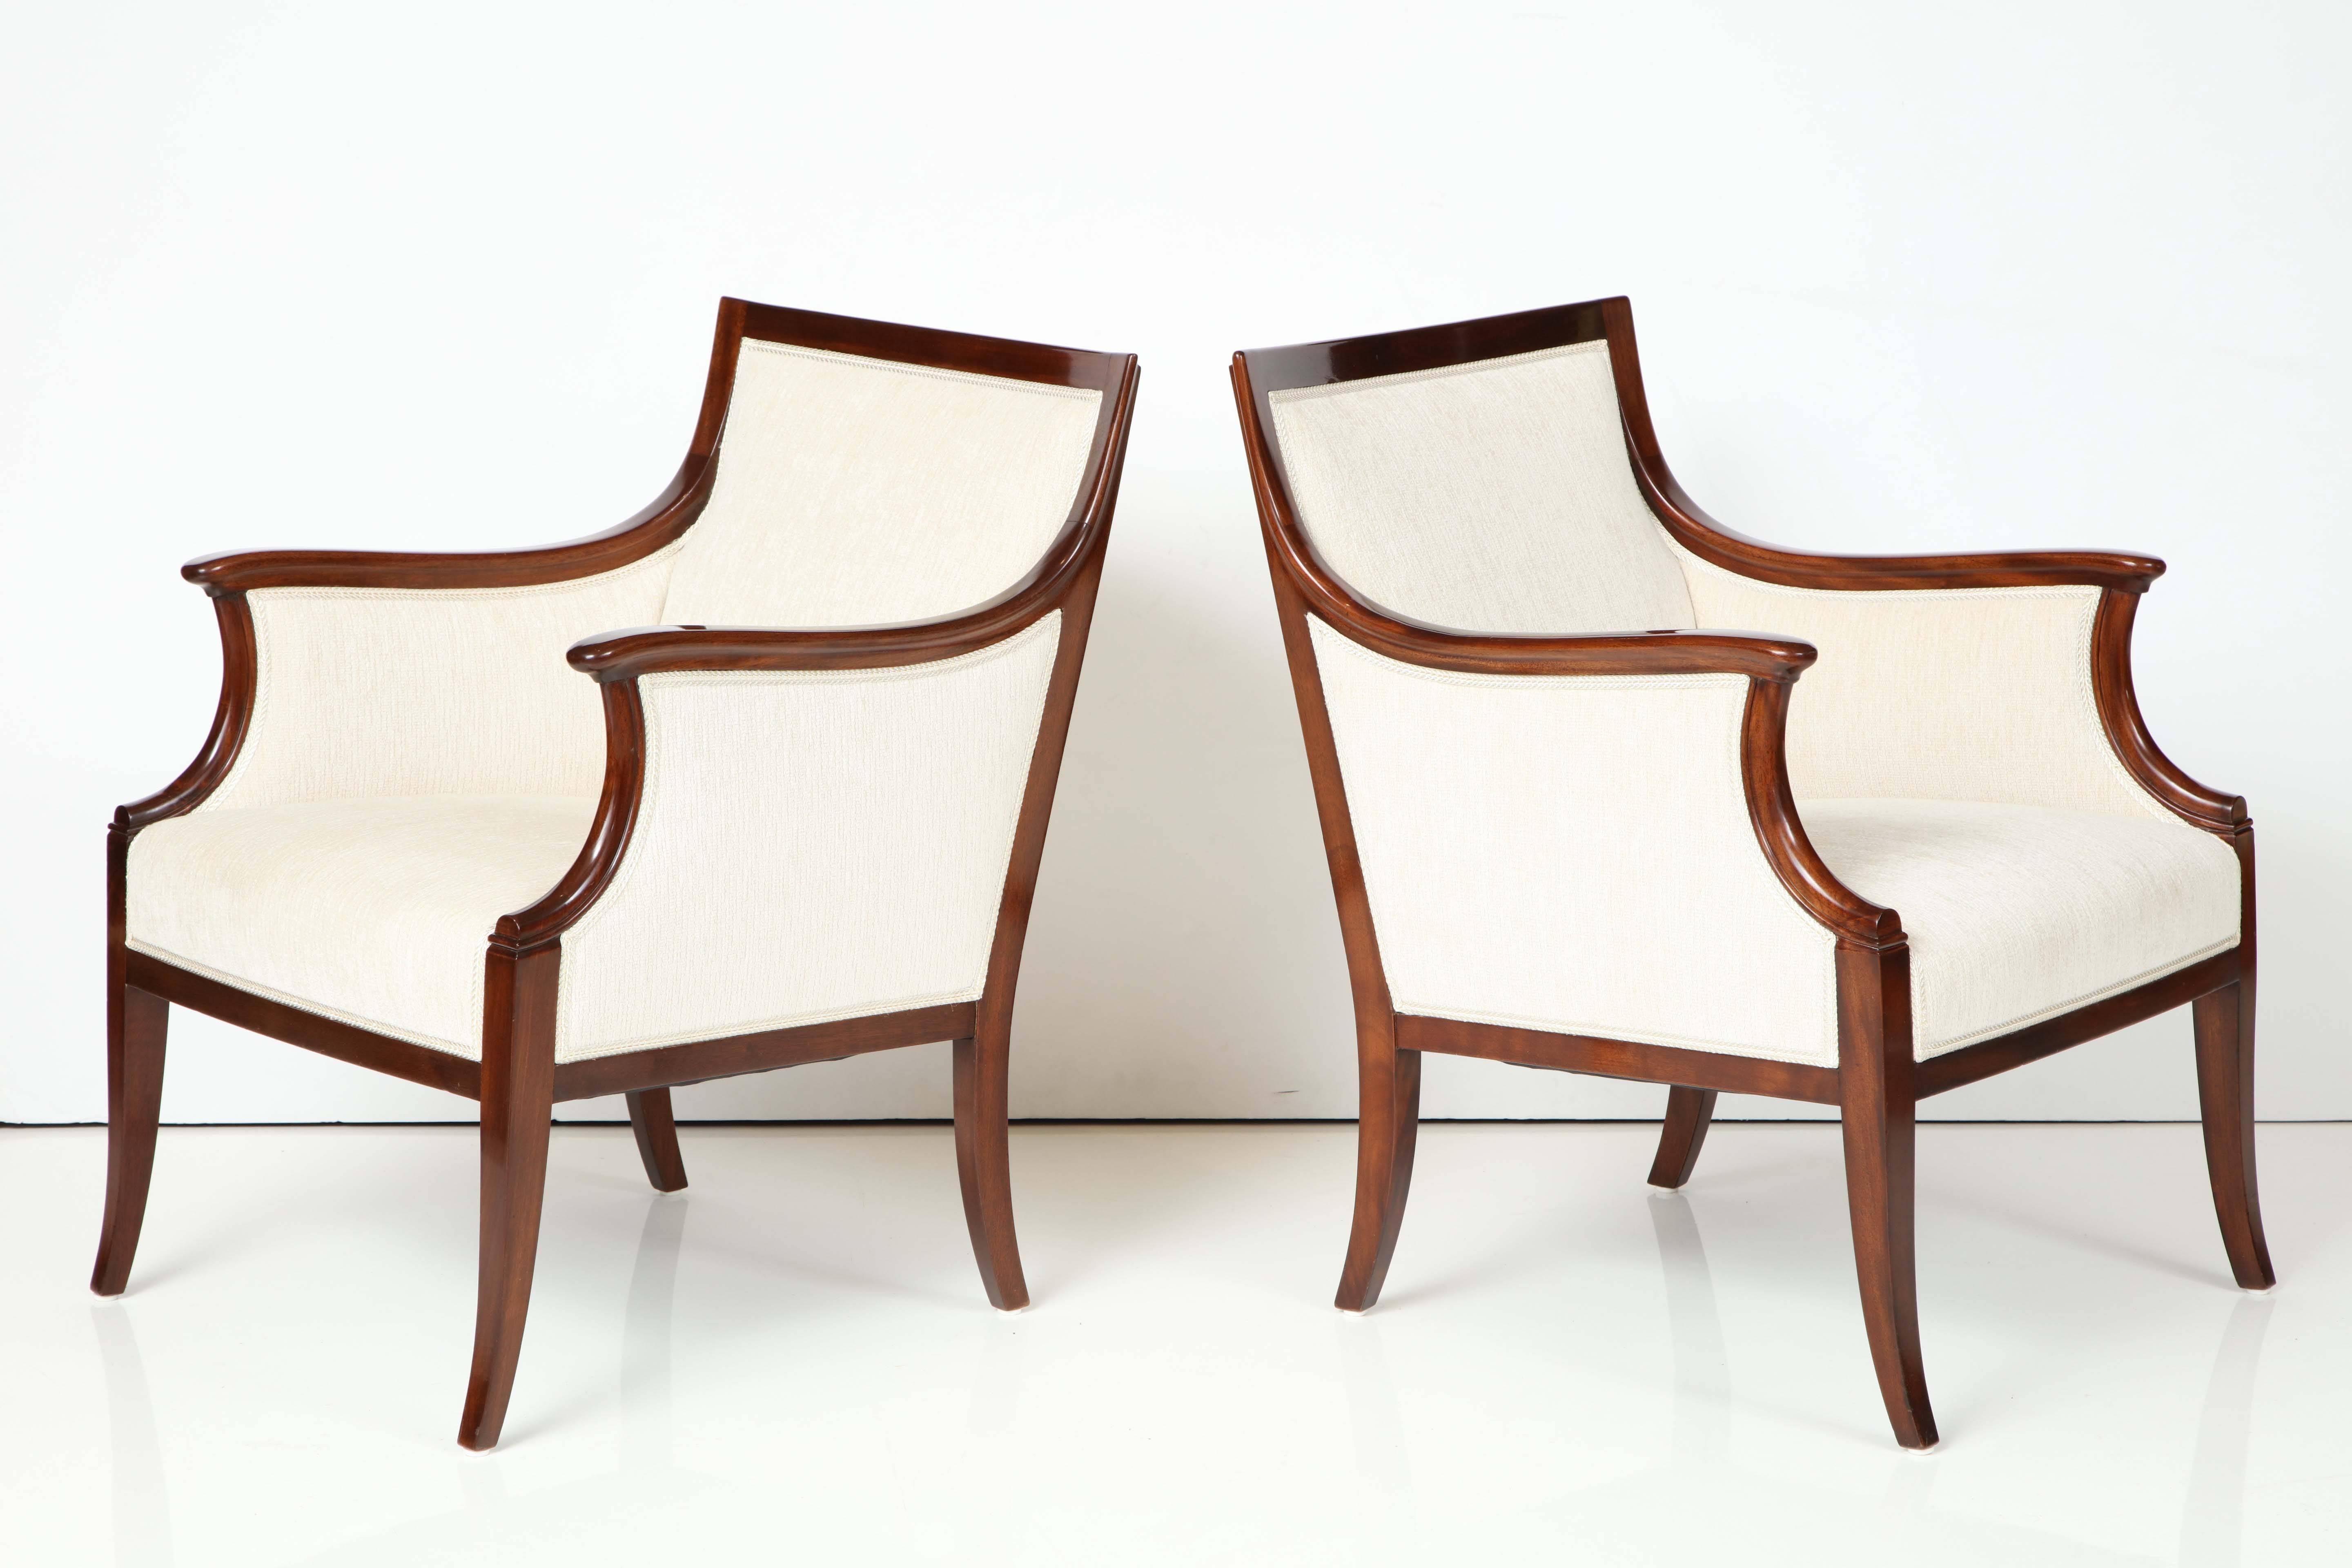 A pair of Danish rich mahogany armchairs by Frits Henningsen, circa 1940, with a slightly curved rectangular backrest, downswept armrests on scrolled supports raised on sabre legs.

Fully restored and re-French polished. New wool upholstery.